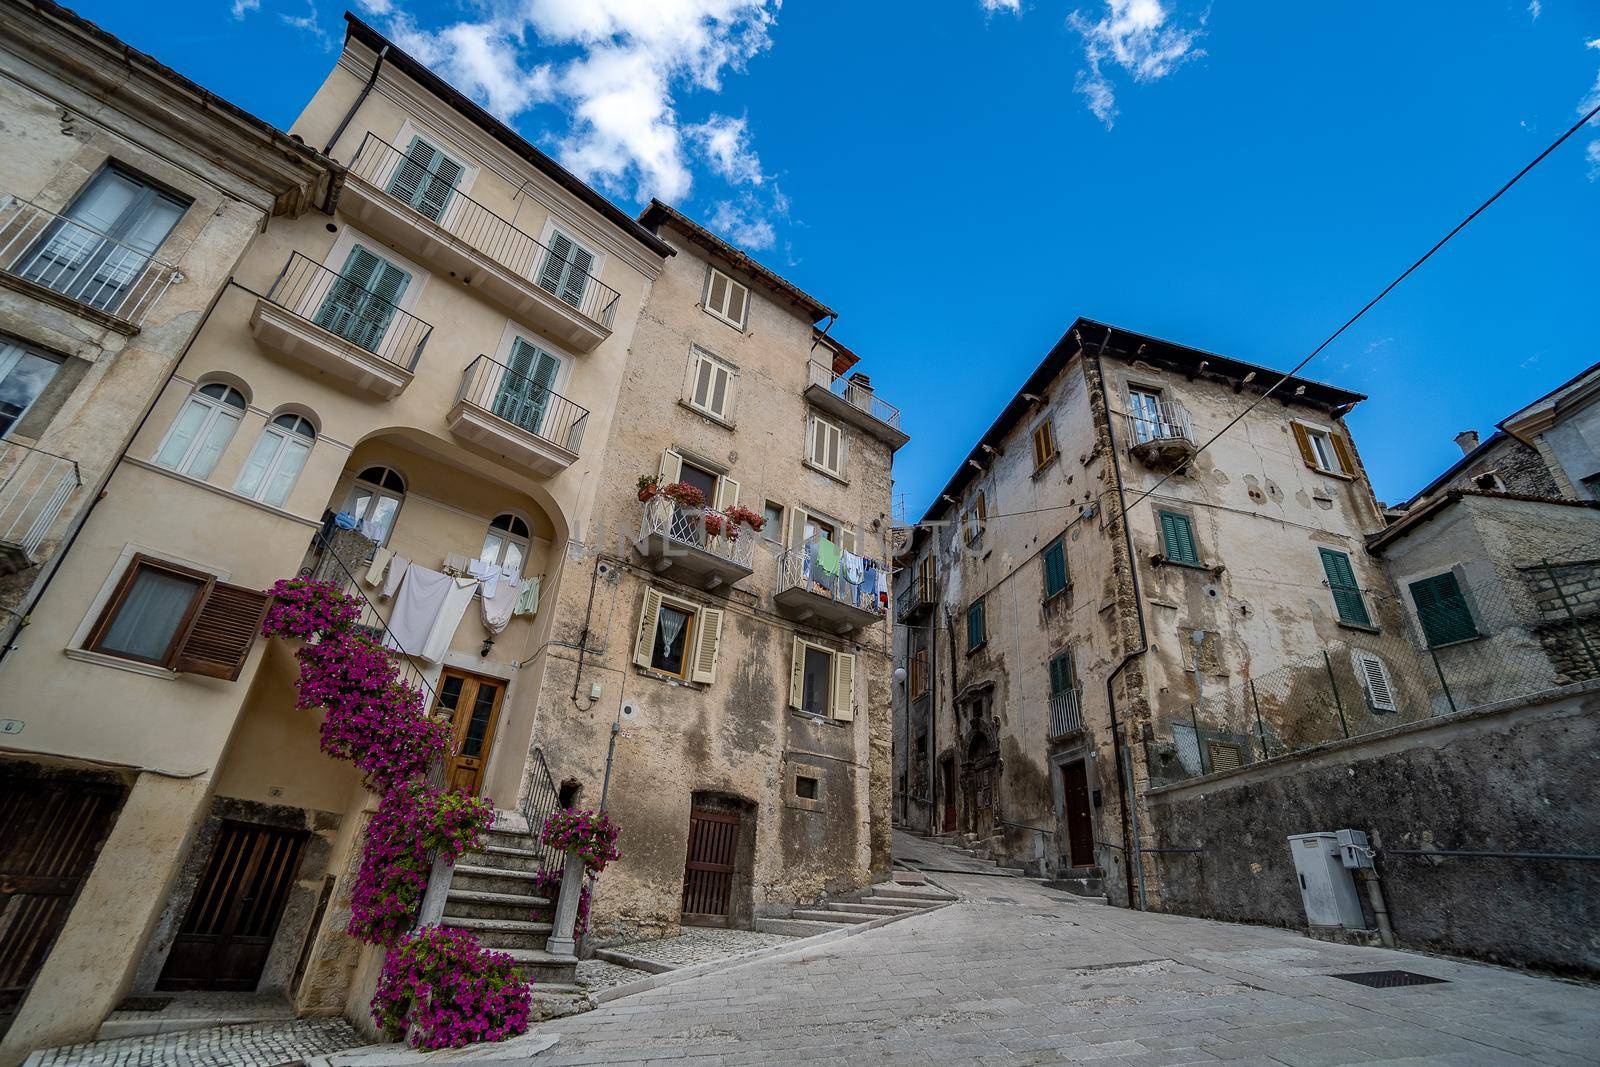 Walk in old streets of Scanno town in Italy by javax